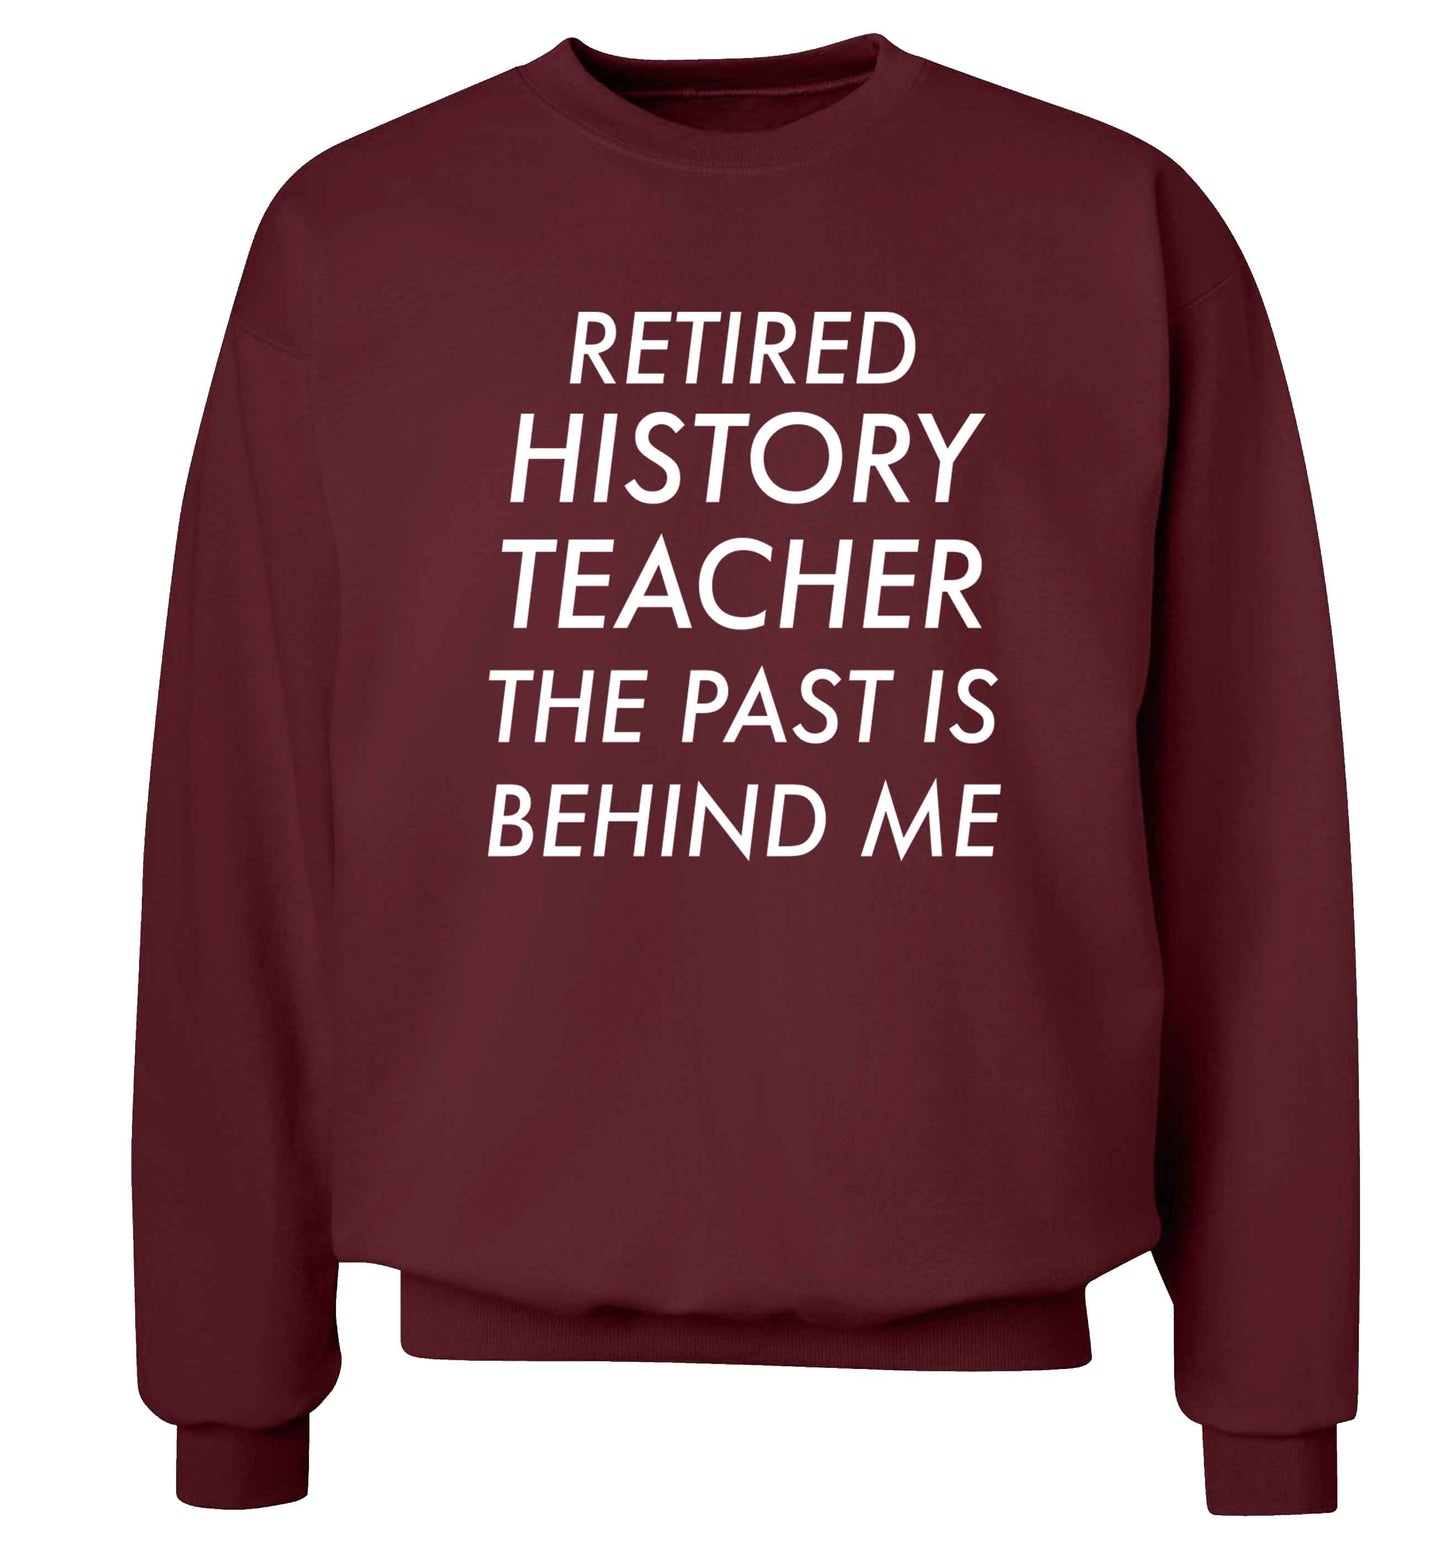 Retired history teacher the past is behind me Adult's unisex maroon Sweater 2XL